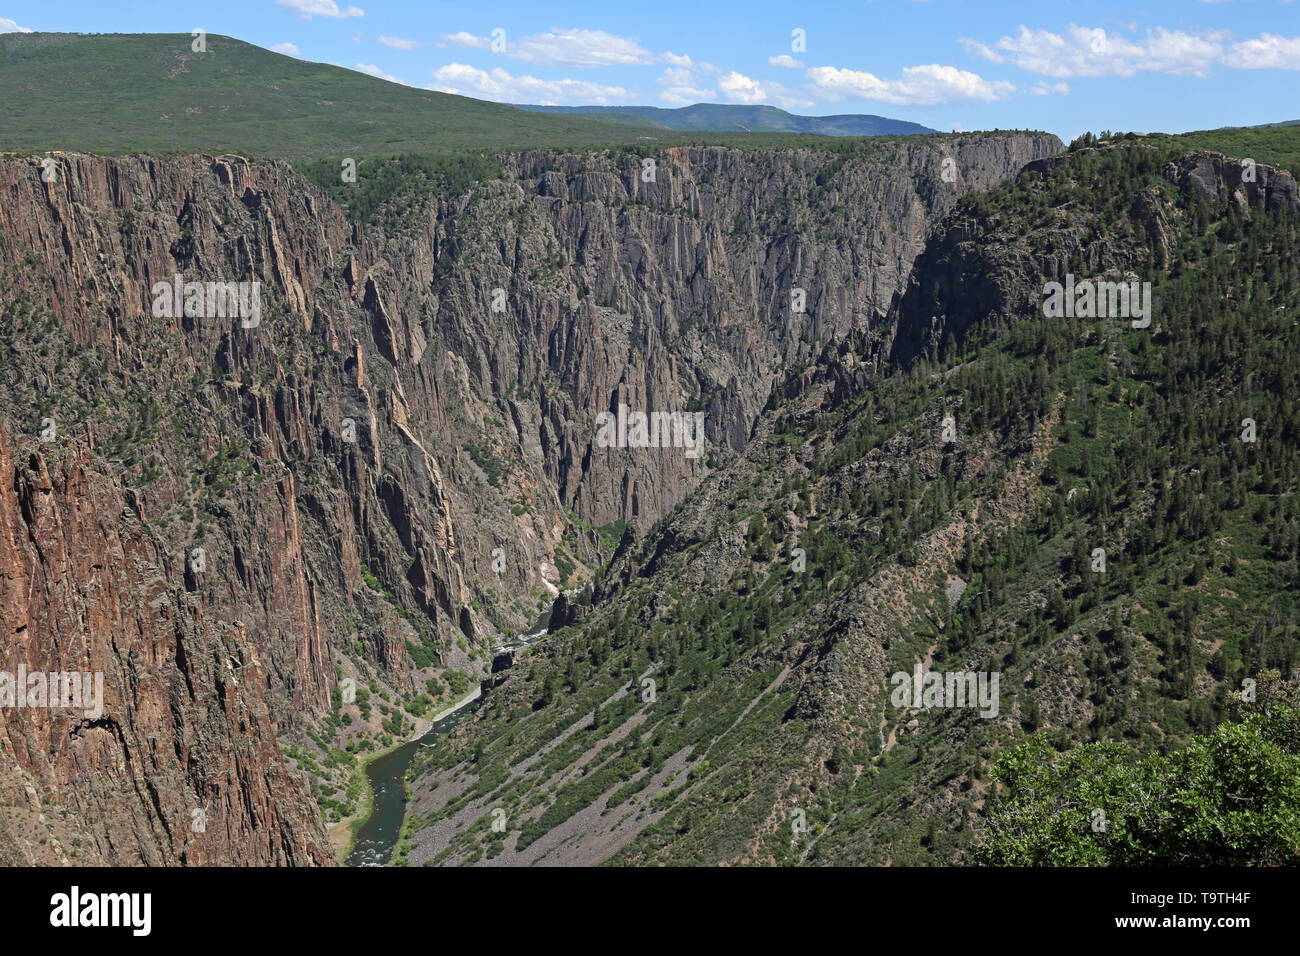 The Gunnison River running through the gorge in Black Canyon of the Gunnison National Park, Colorado. Stock Photo